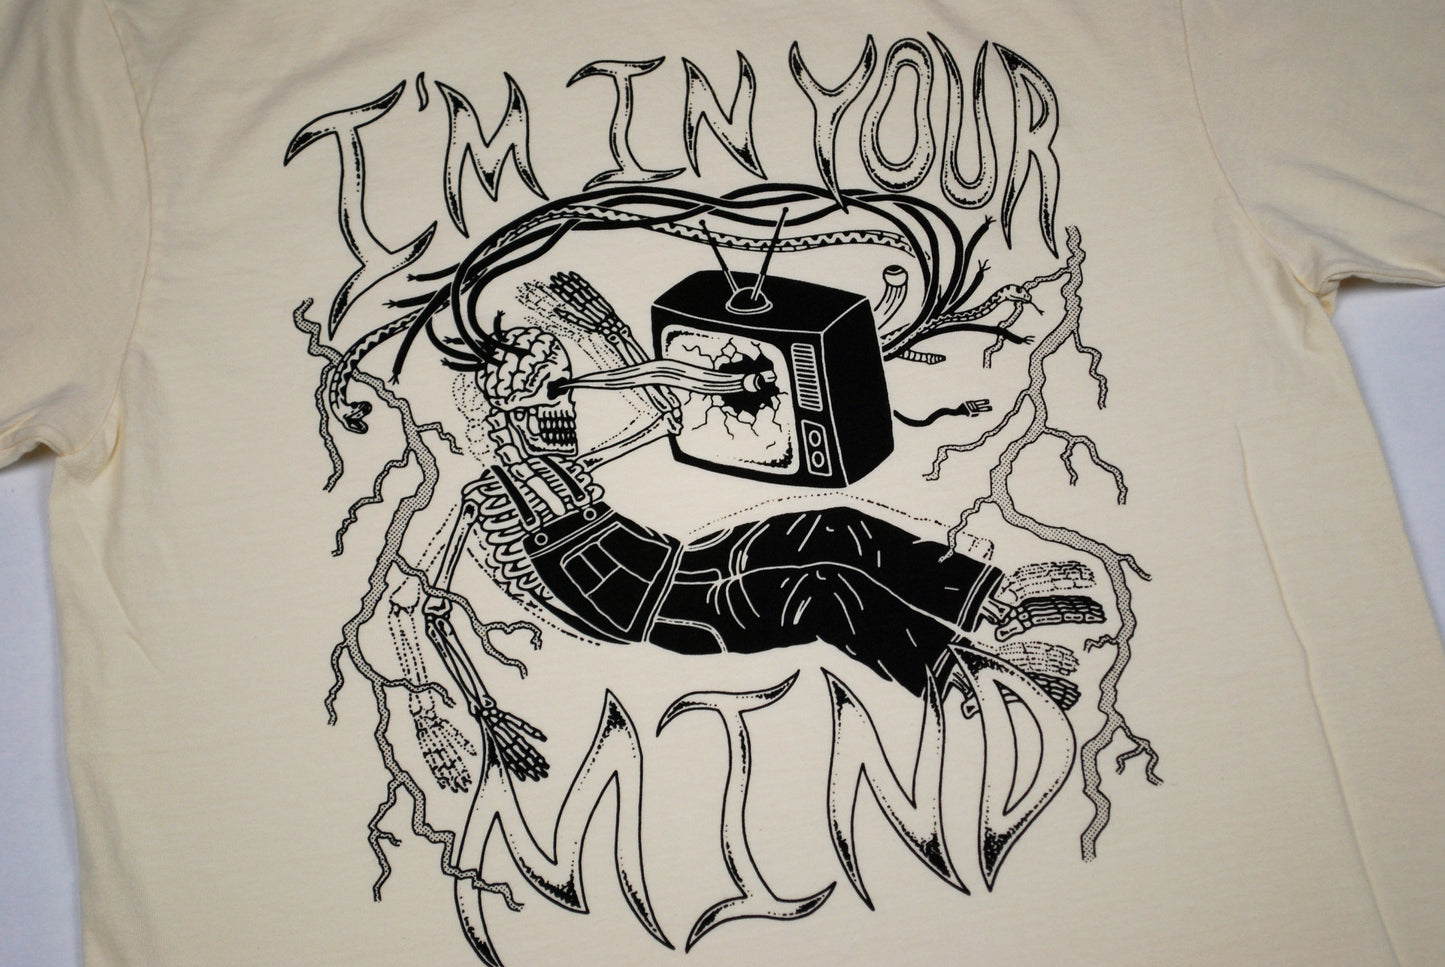 KGLW "I’m In Your Mind" Tee